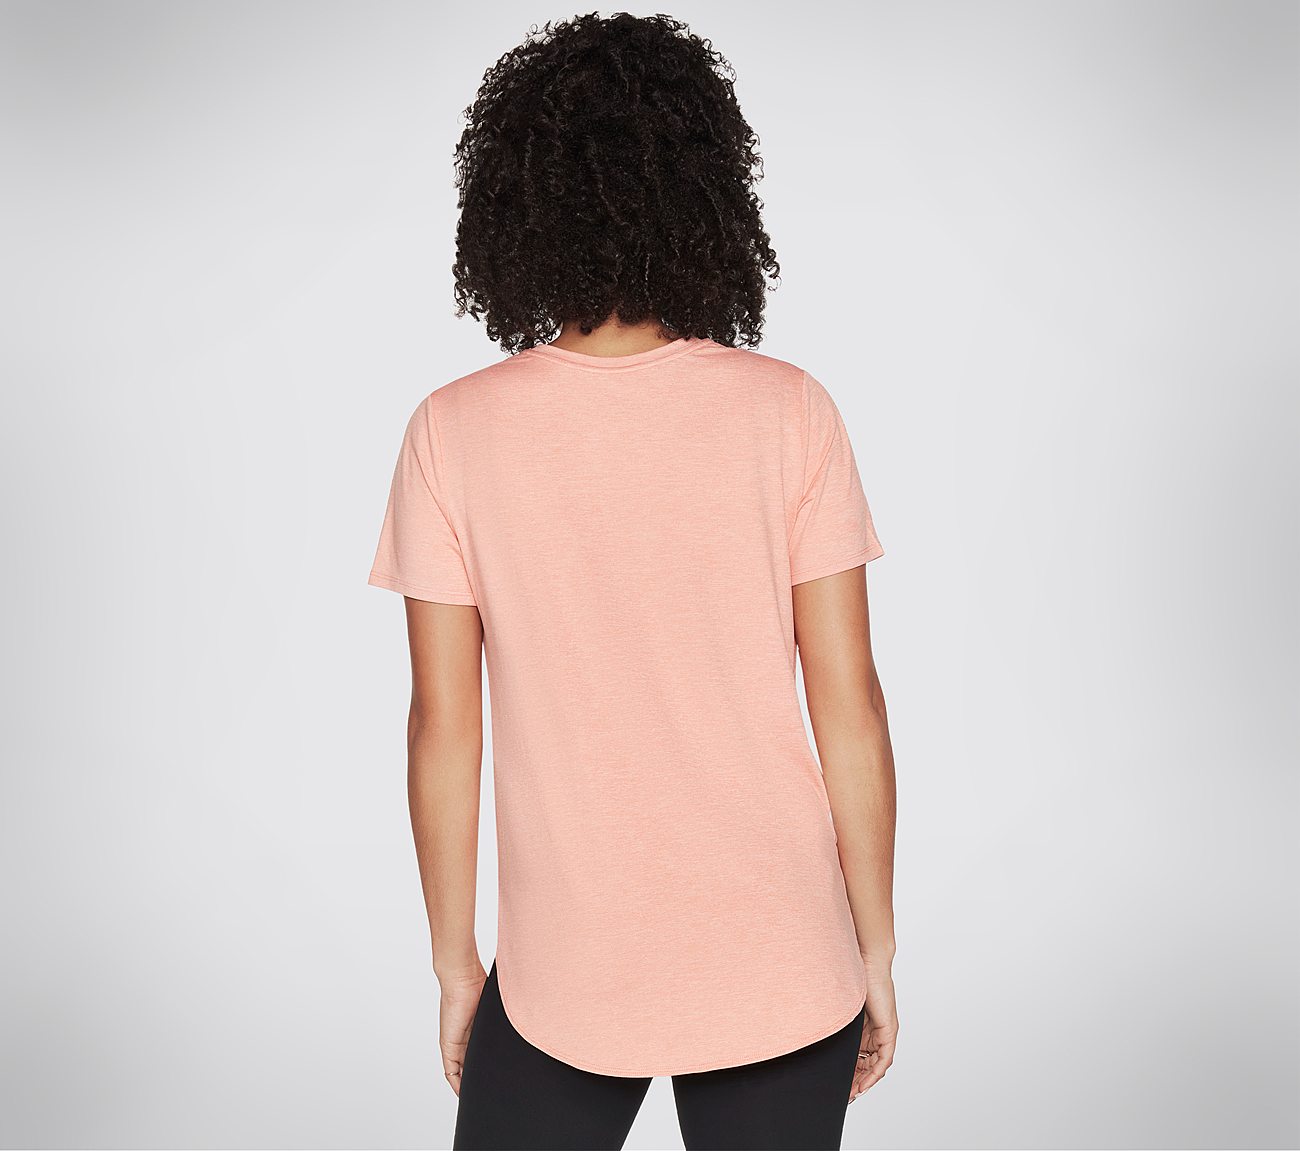 GODRI SWIFT TUNIC TEE, CORAL/LIME Apparels Top View